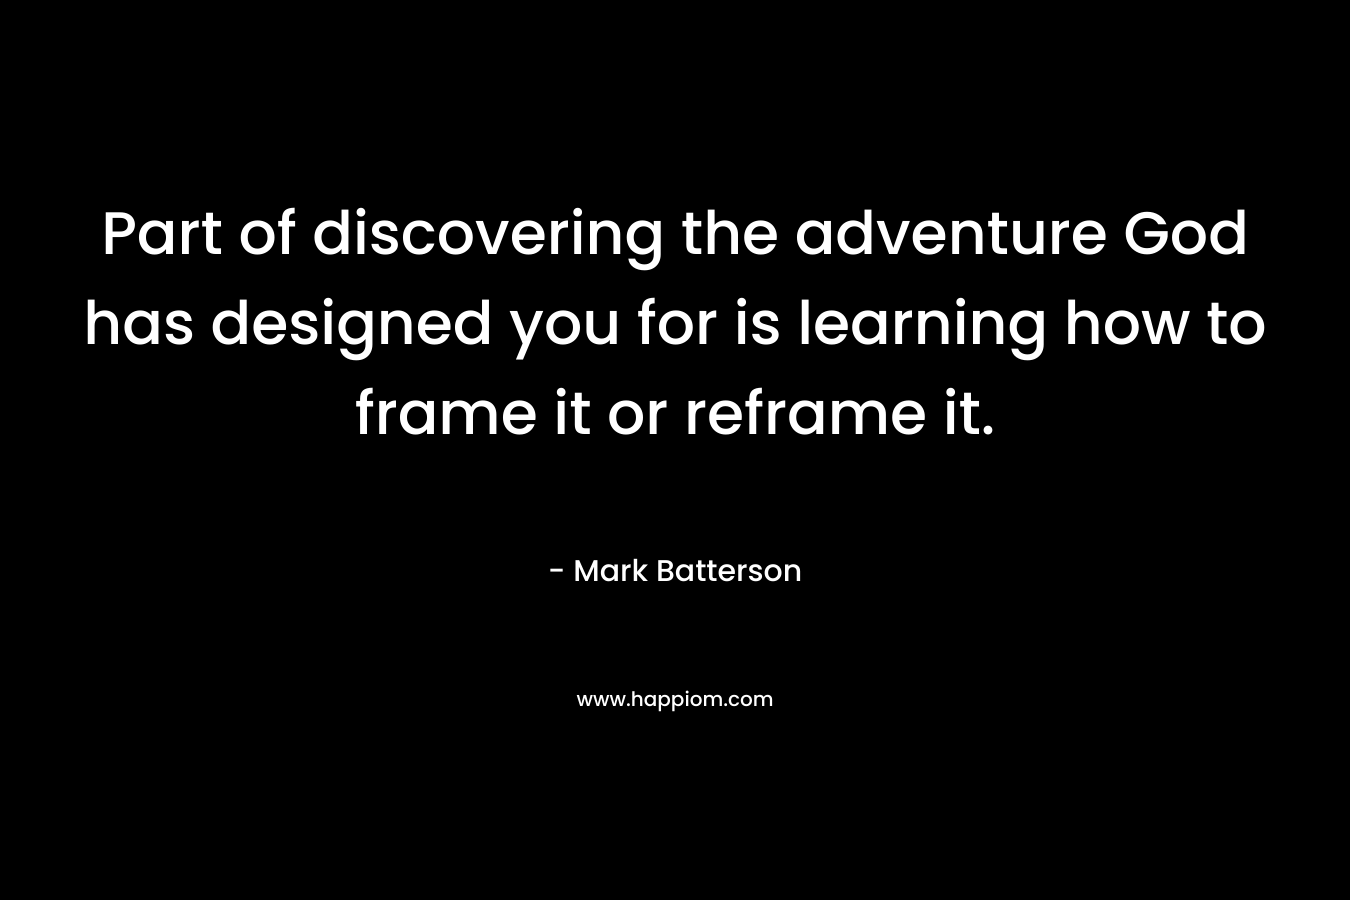 Part of discovering the adventure God has designed you for is learning how to frame it or reframe it.